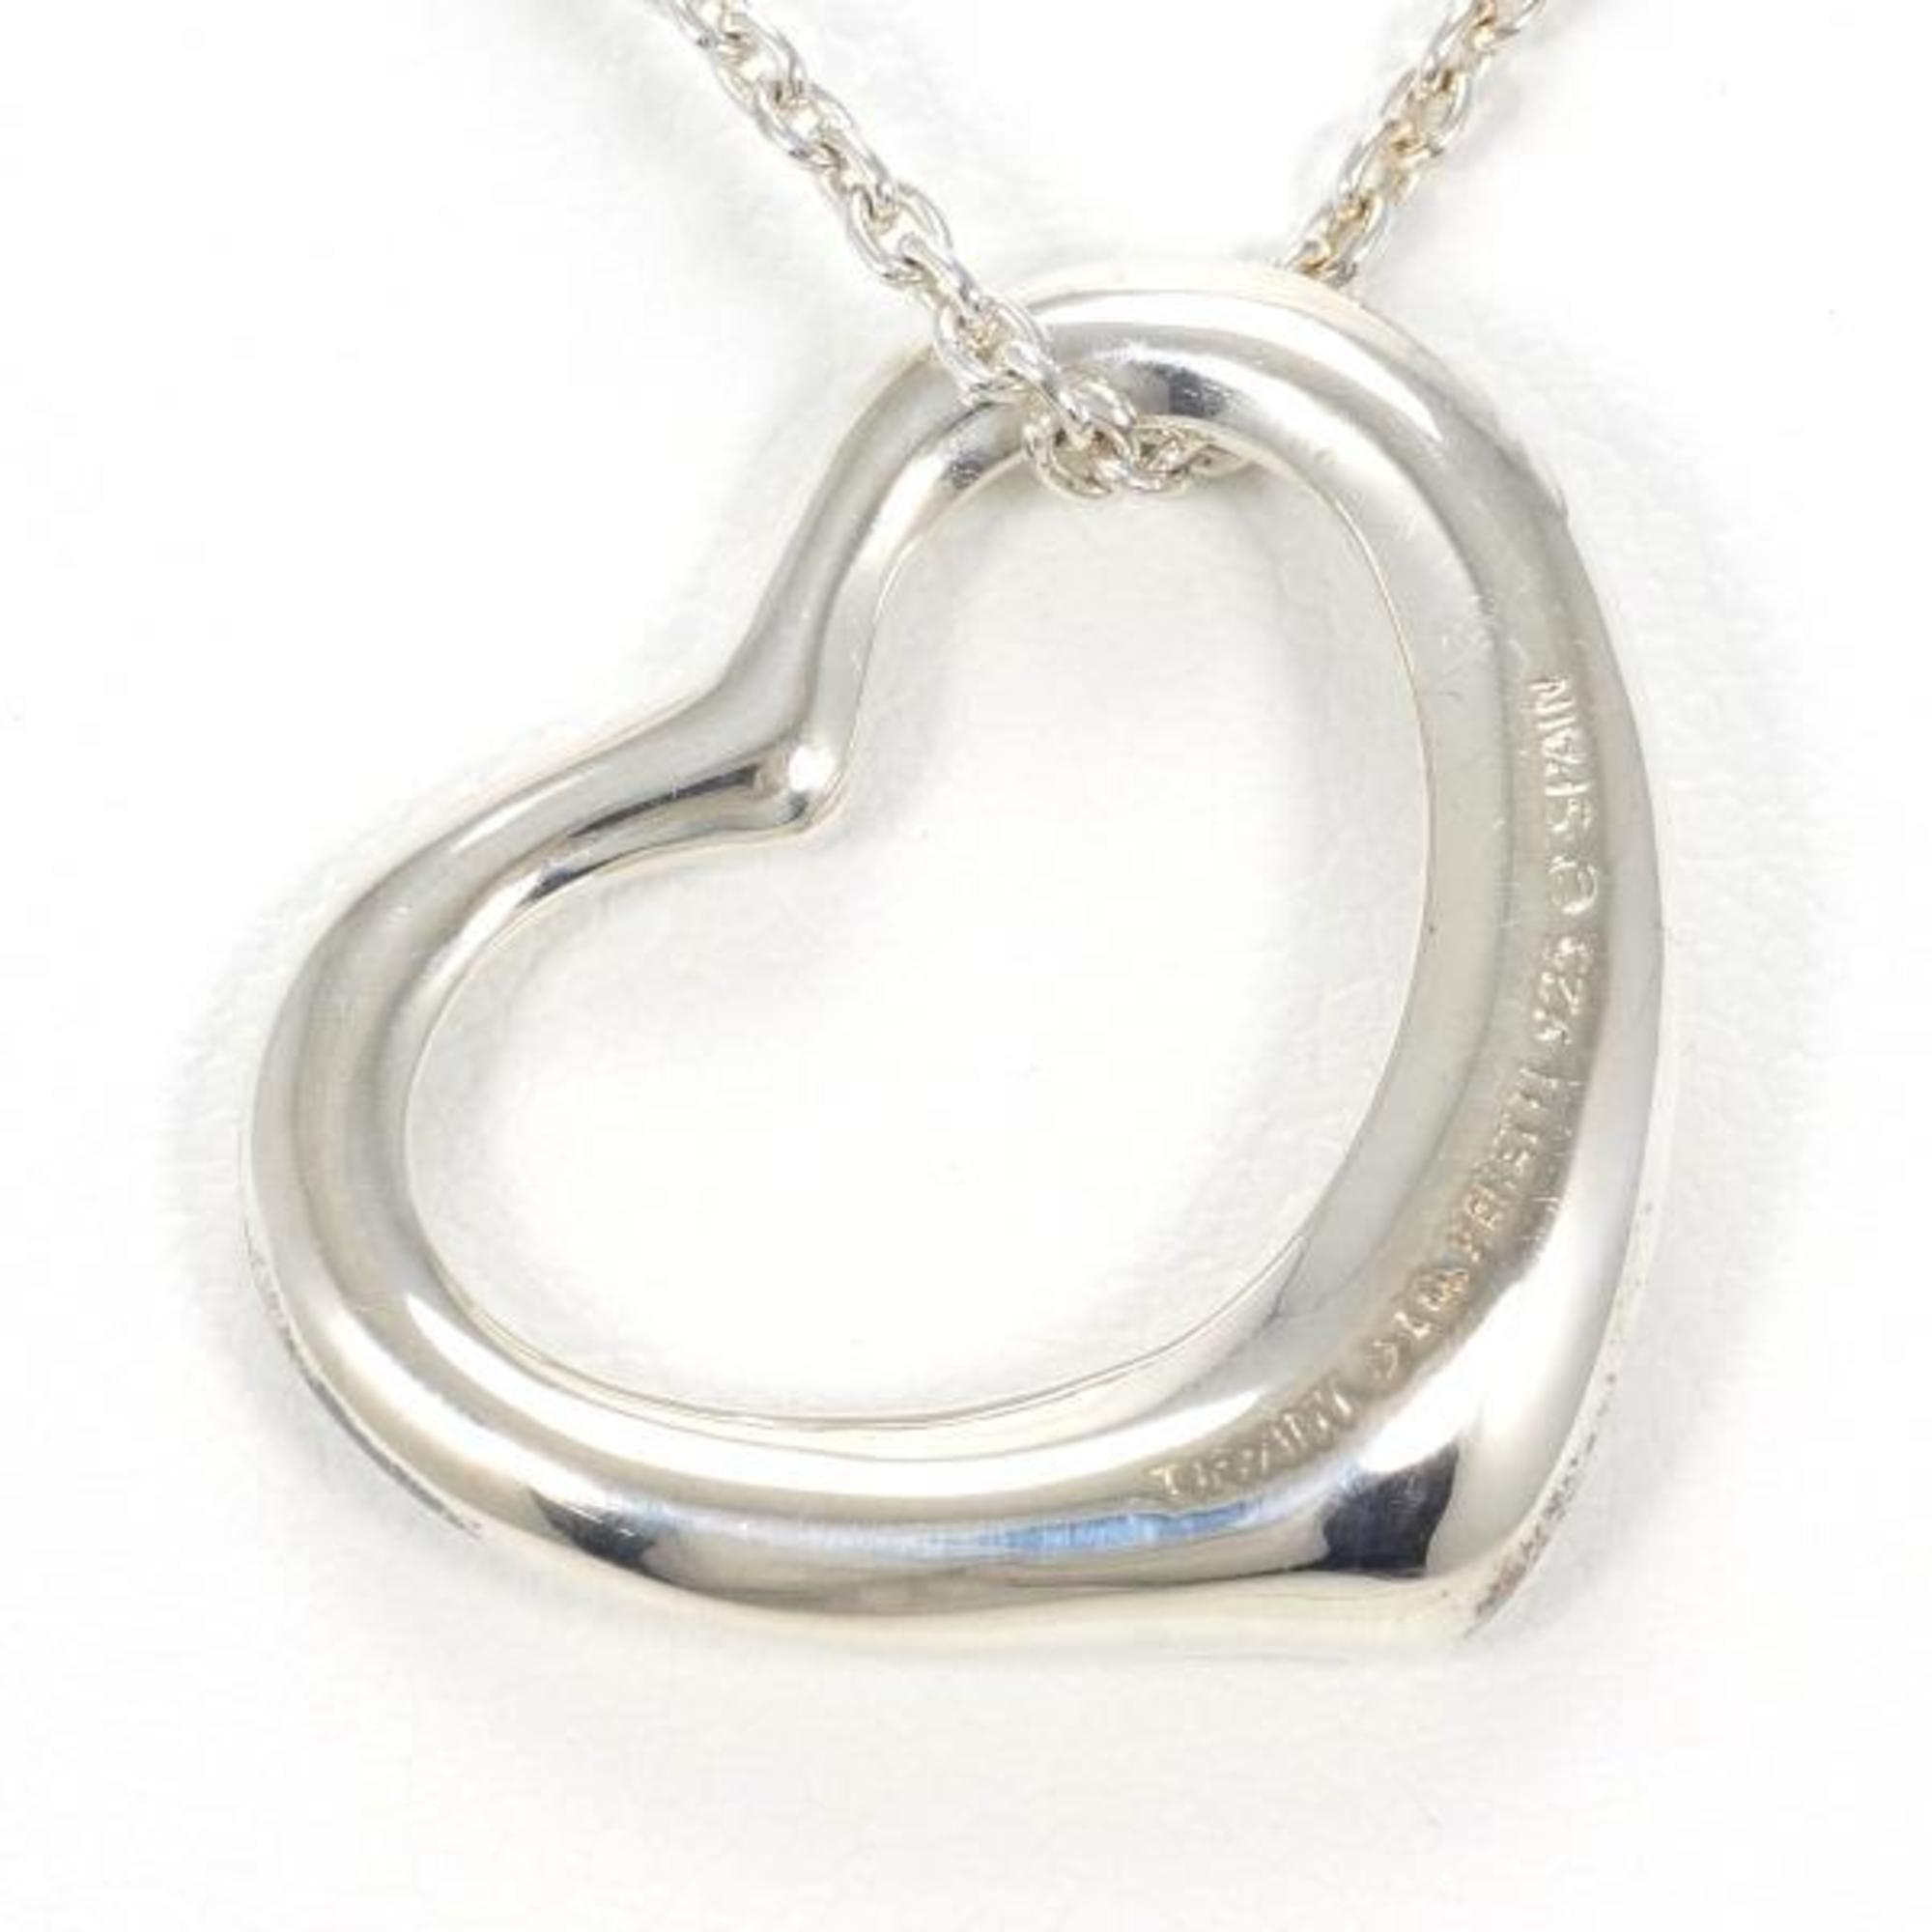 Tiffany Open Heart Silver Necklace Total Weight Approx. 5.6g 41cm Jewelry